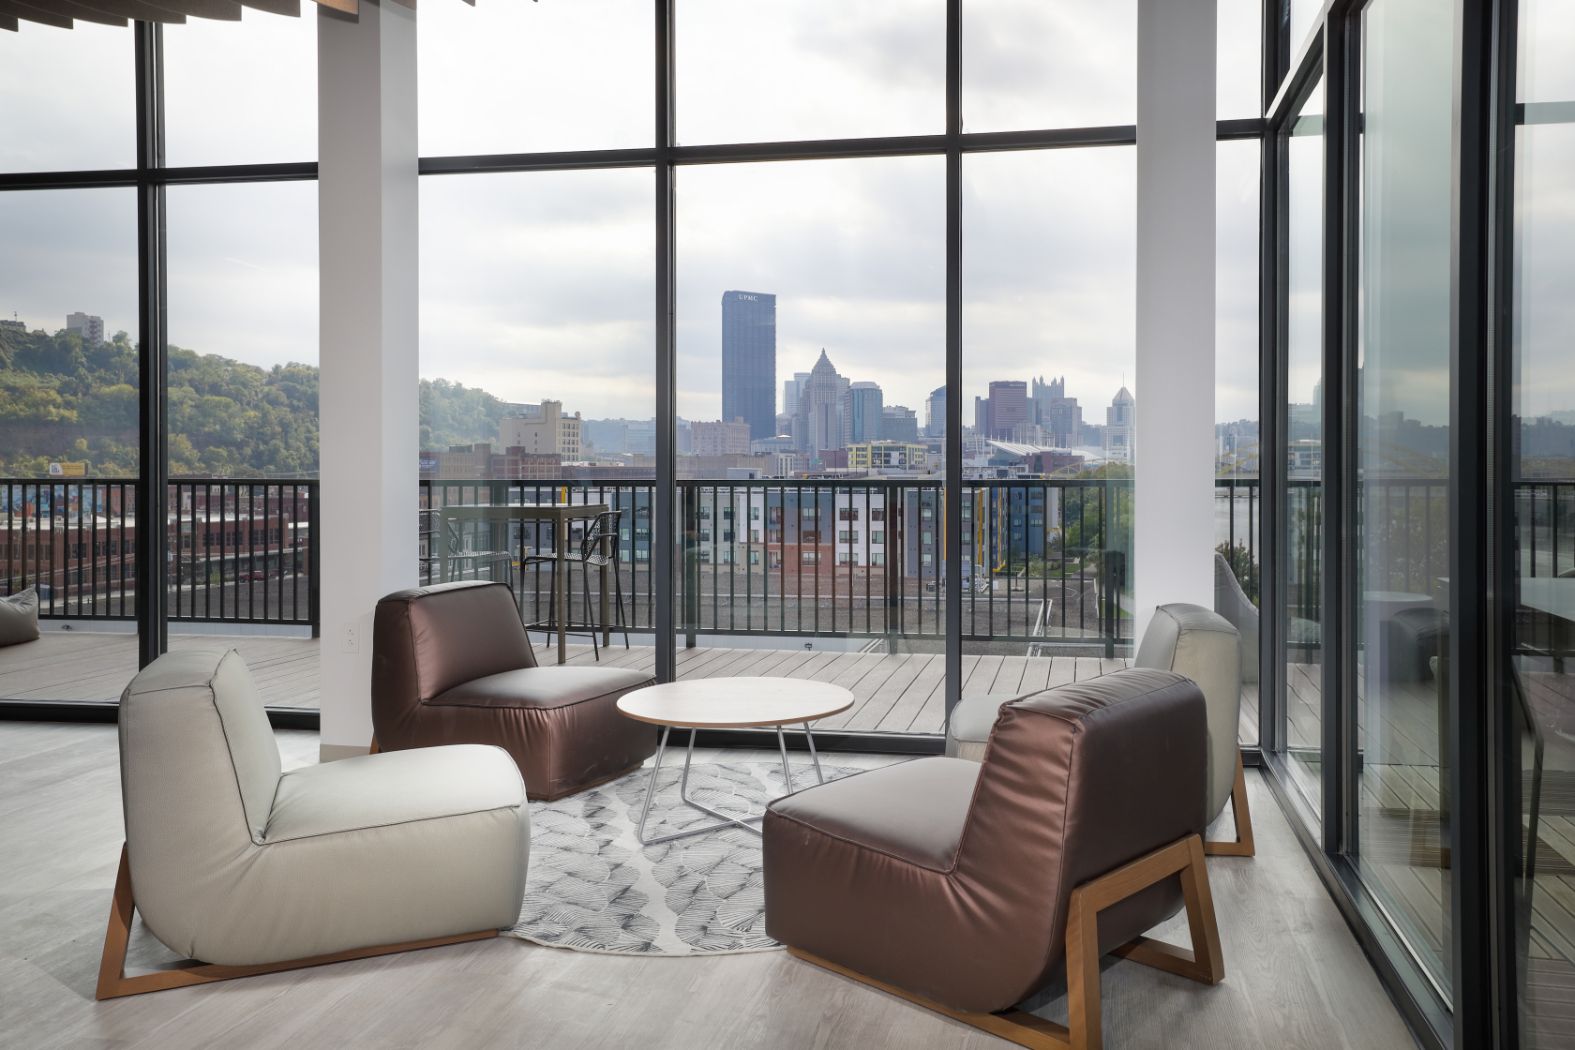 Sixth floor club room with a fireplace, chairs, couches, and a view of the strip district and downtown Pittsburgh